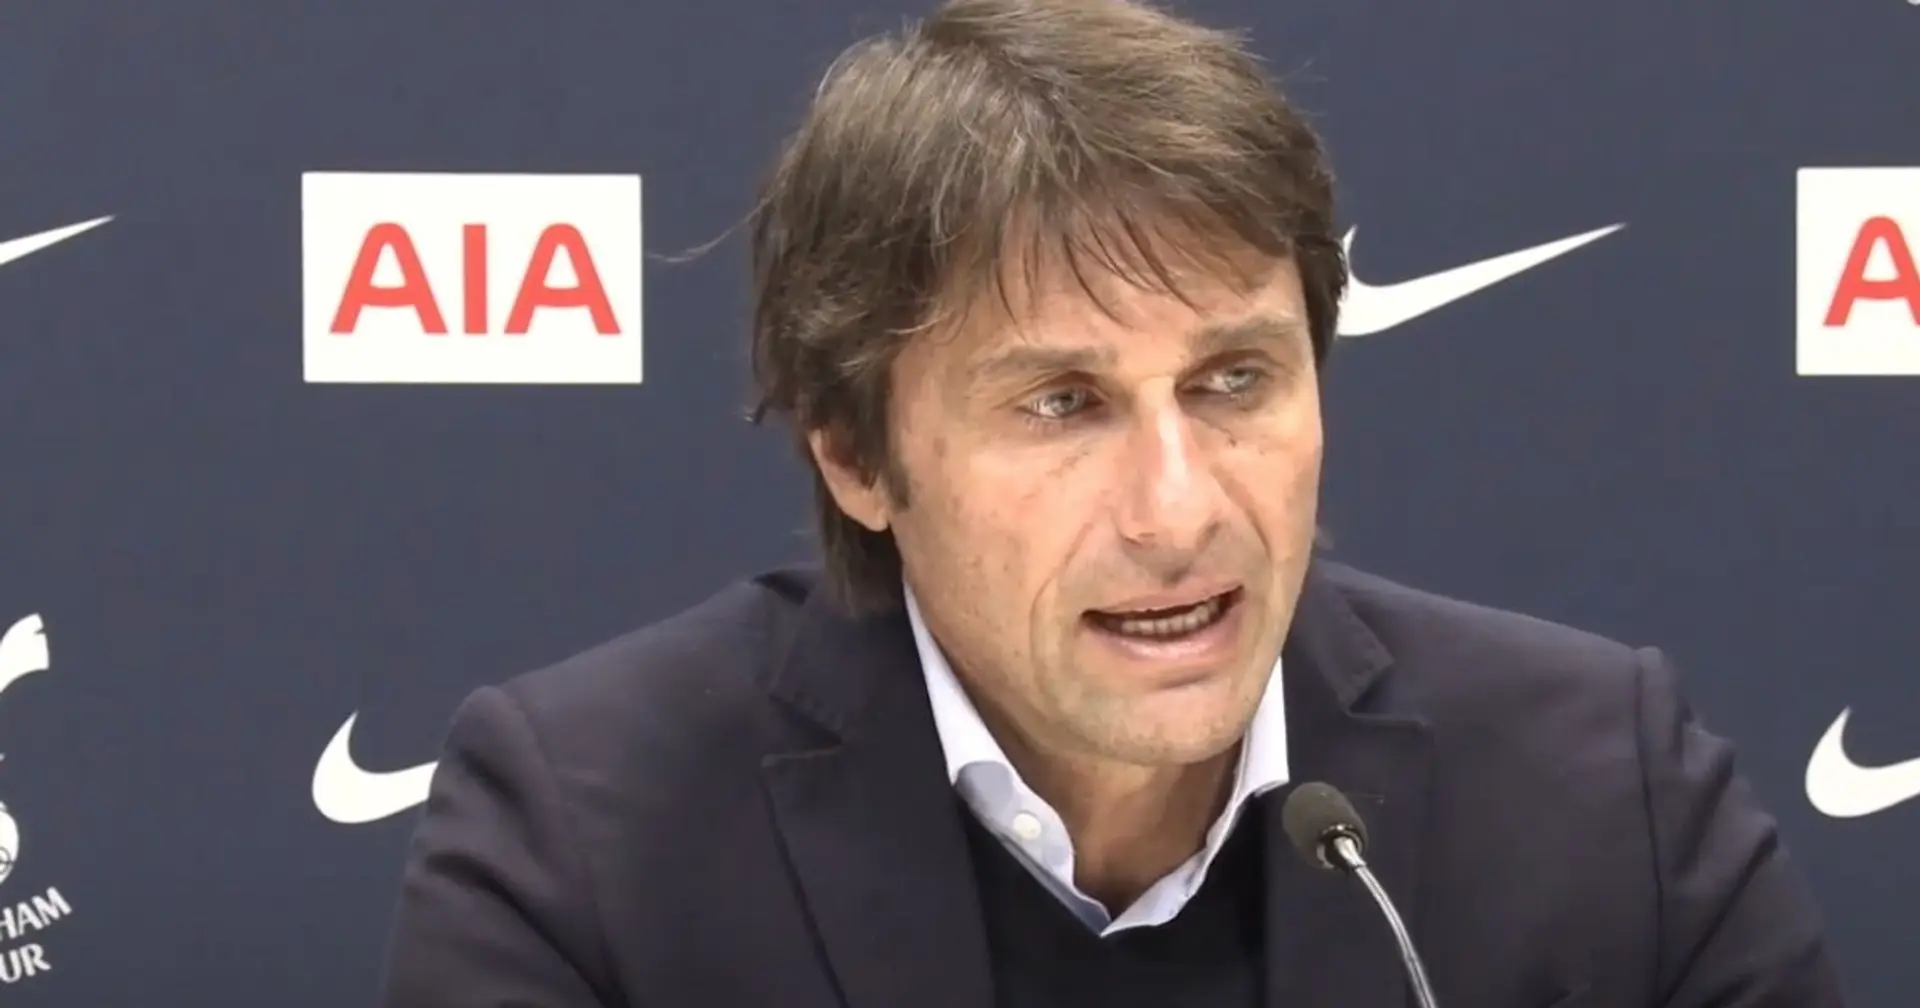 'It’s not fair': Antonio Conte shows sympathy for banned Russian athletes 